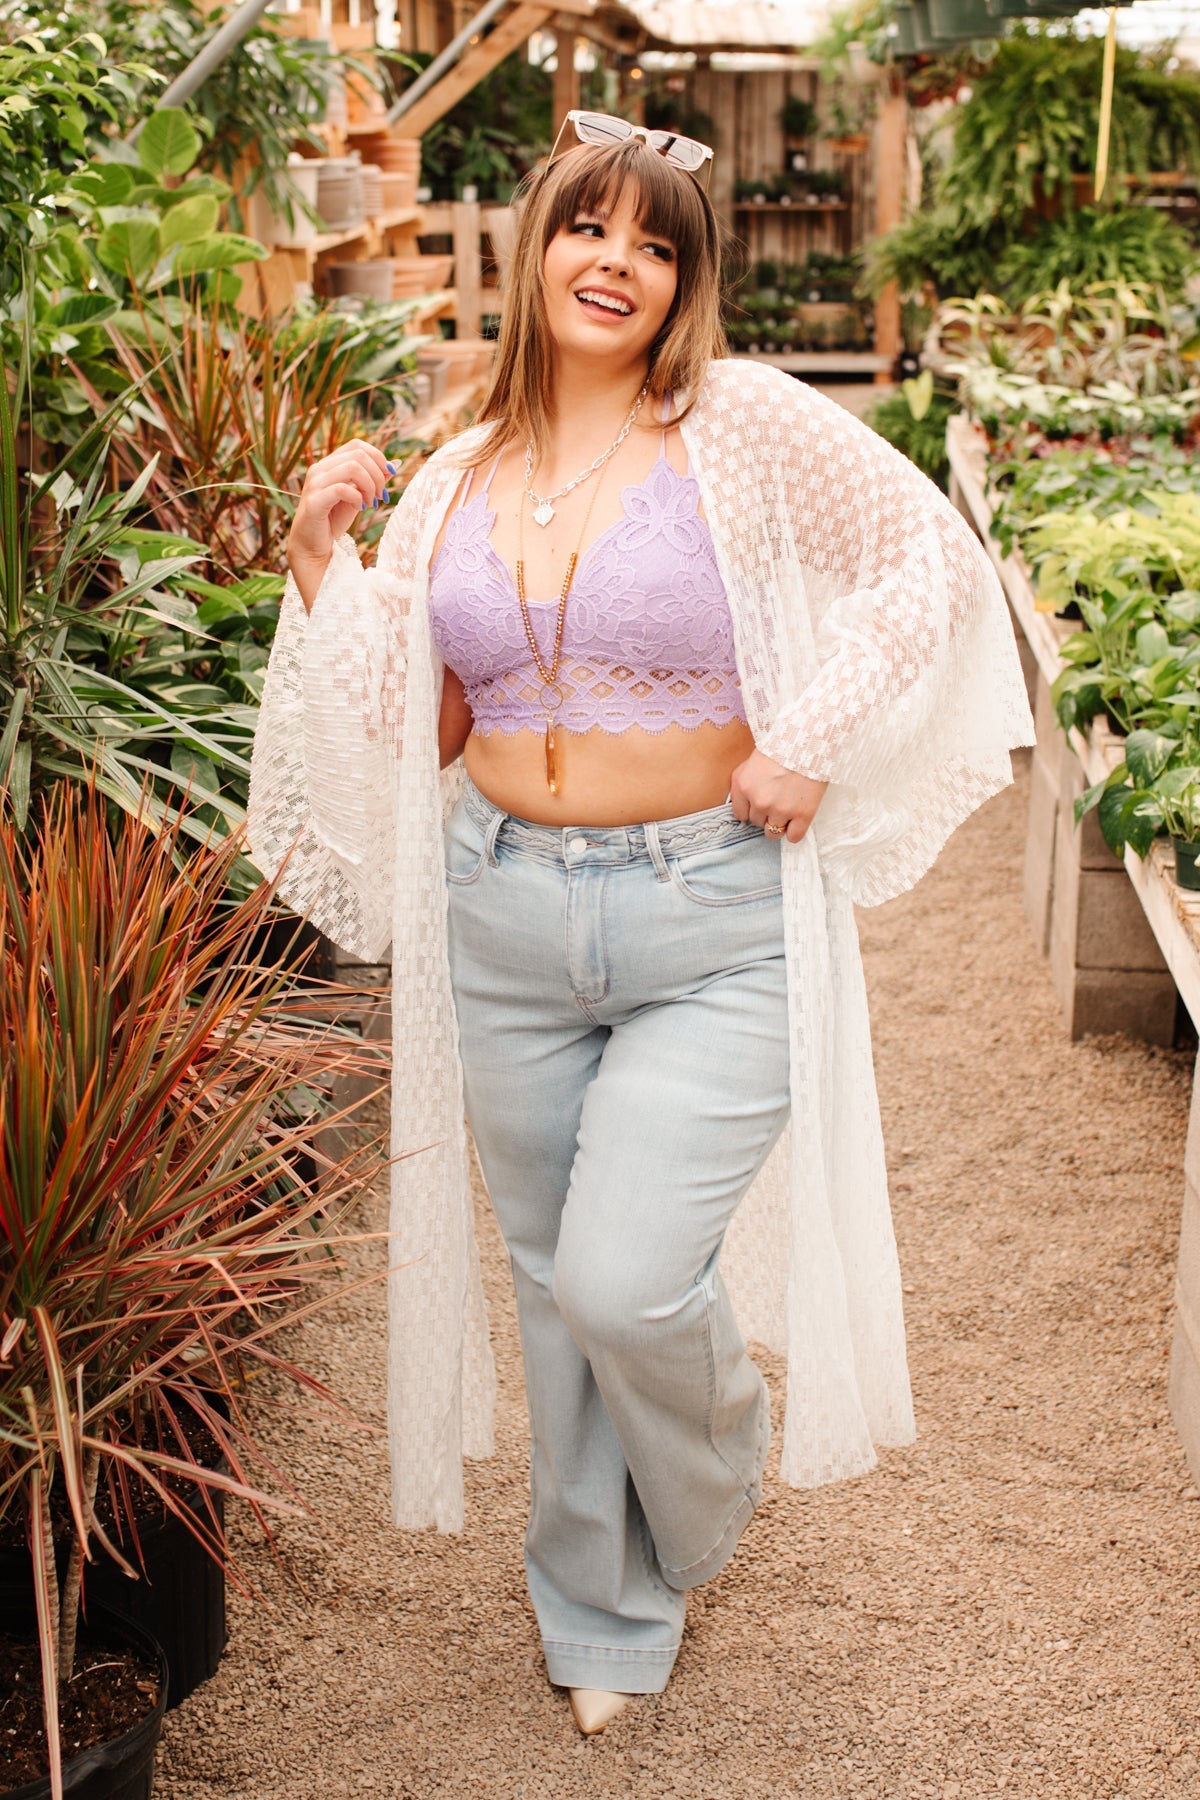 SCALLOPED LACE CAMI BRALETTE in LT TAUPE – Yee Haw Ranch Outfitters